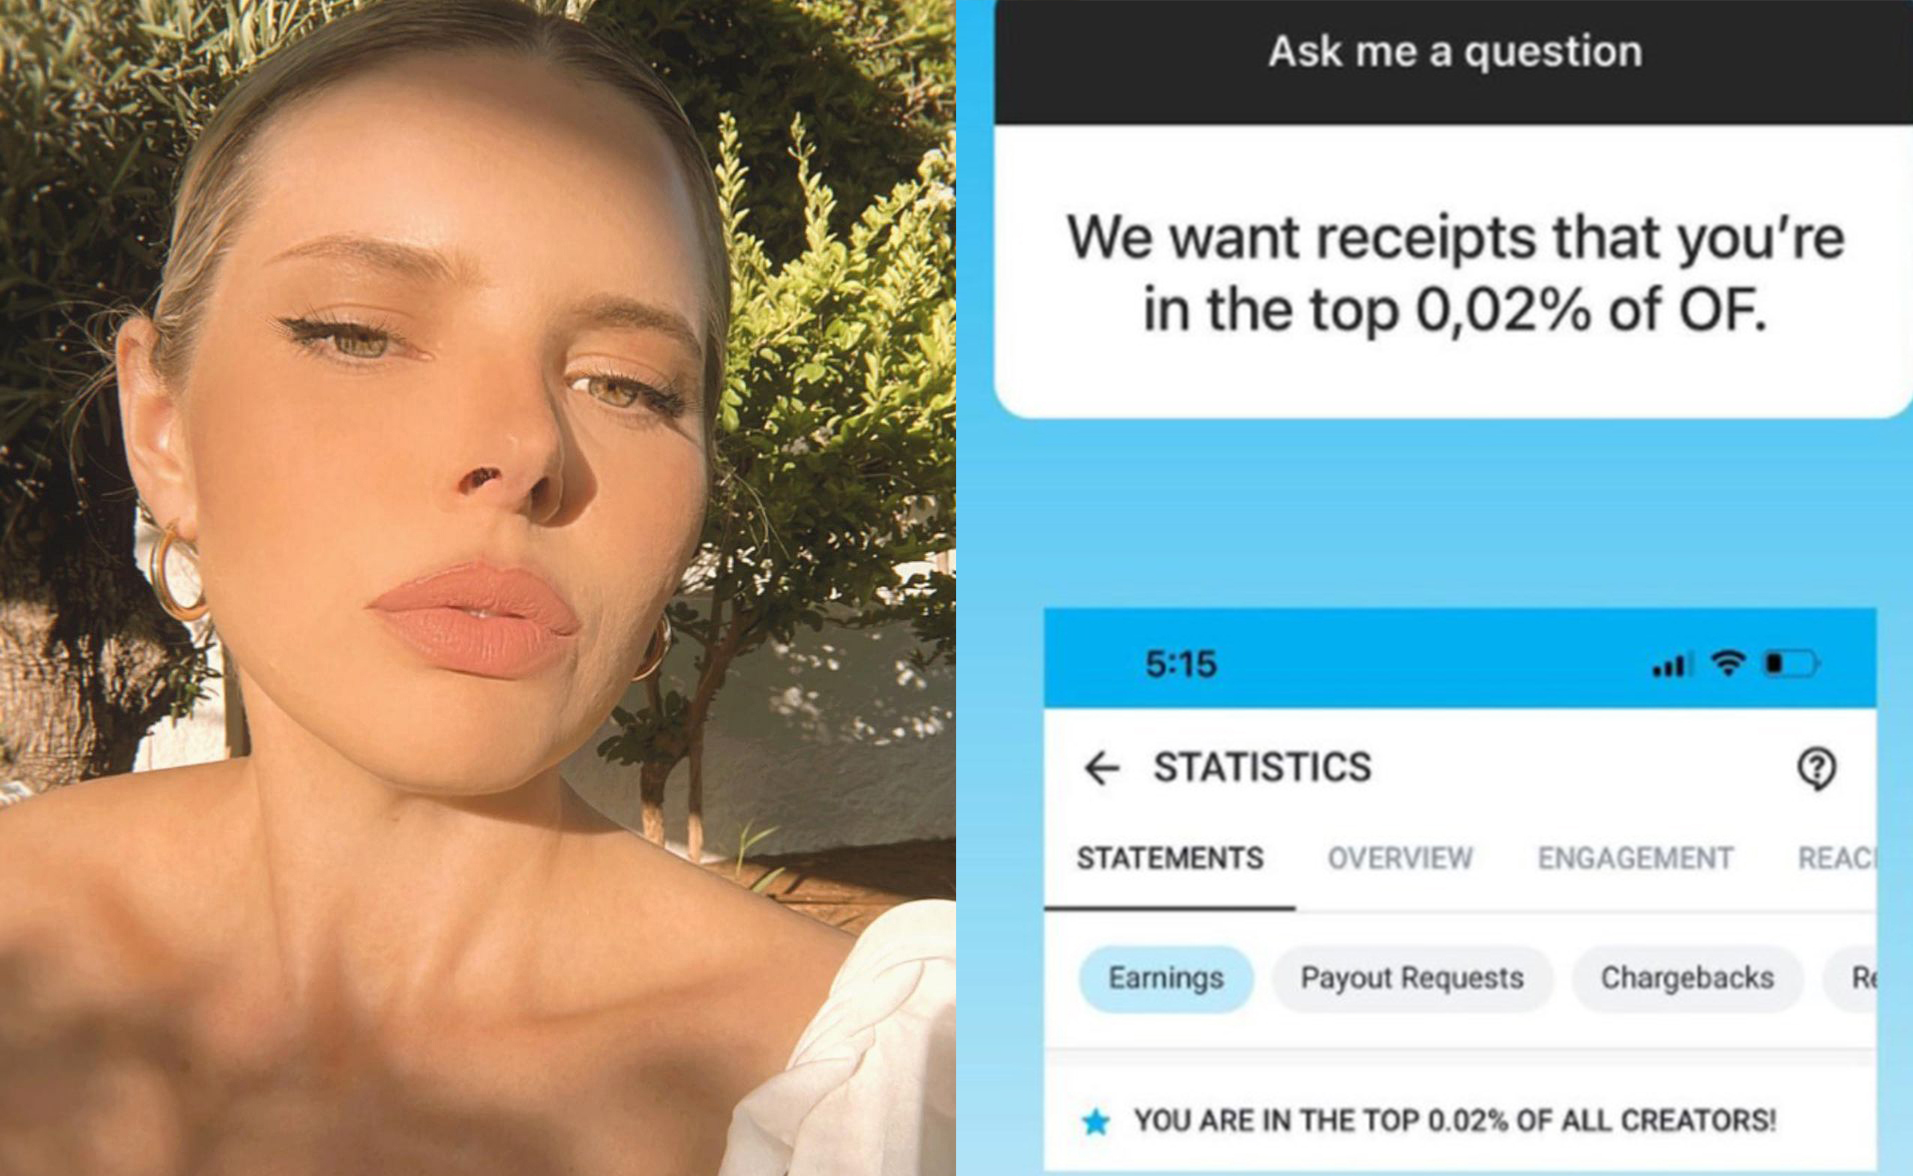 “My bank account speaks for itself”: MAFS’ Olivia Frazer slams claims she faked OnlyFans success